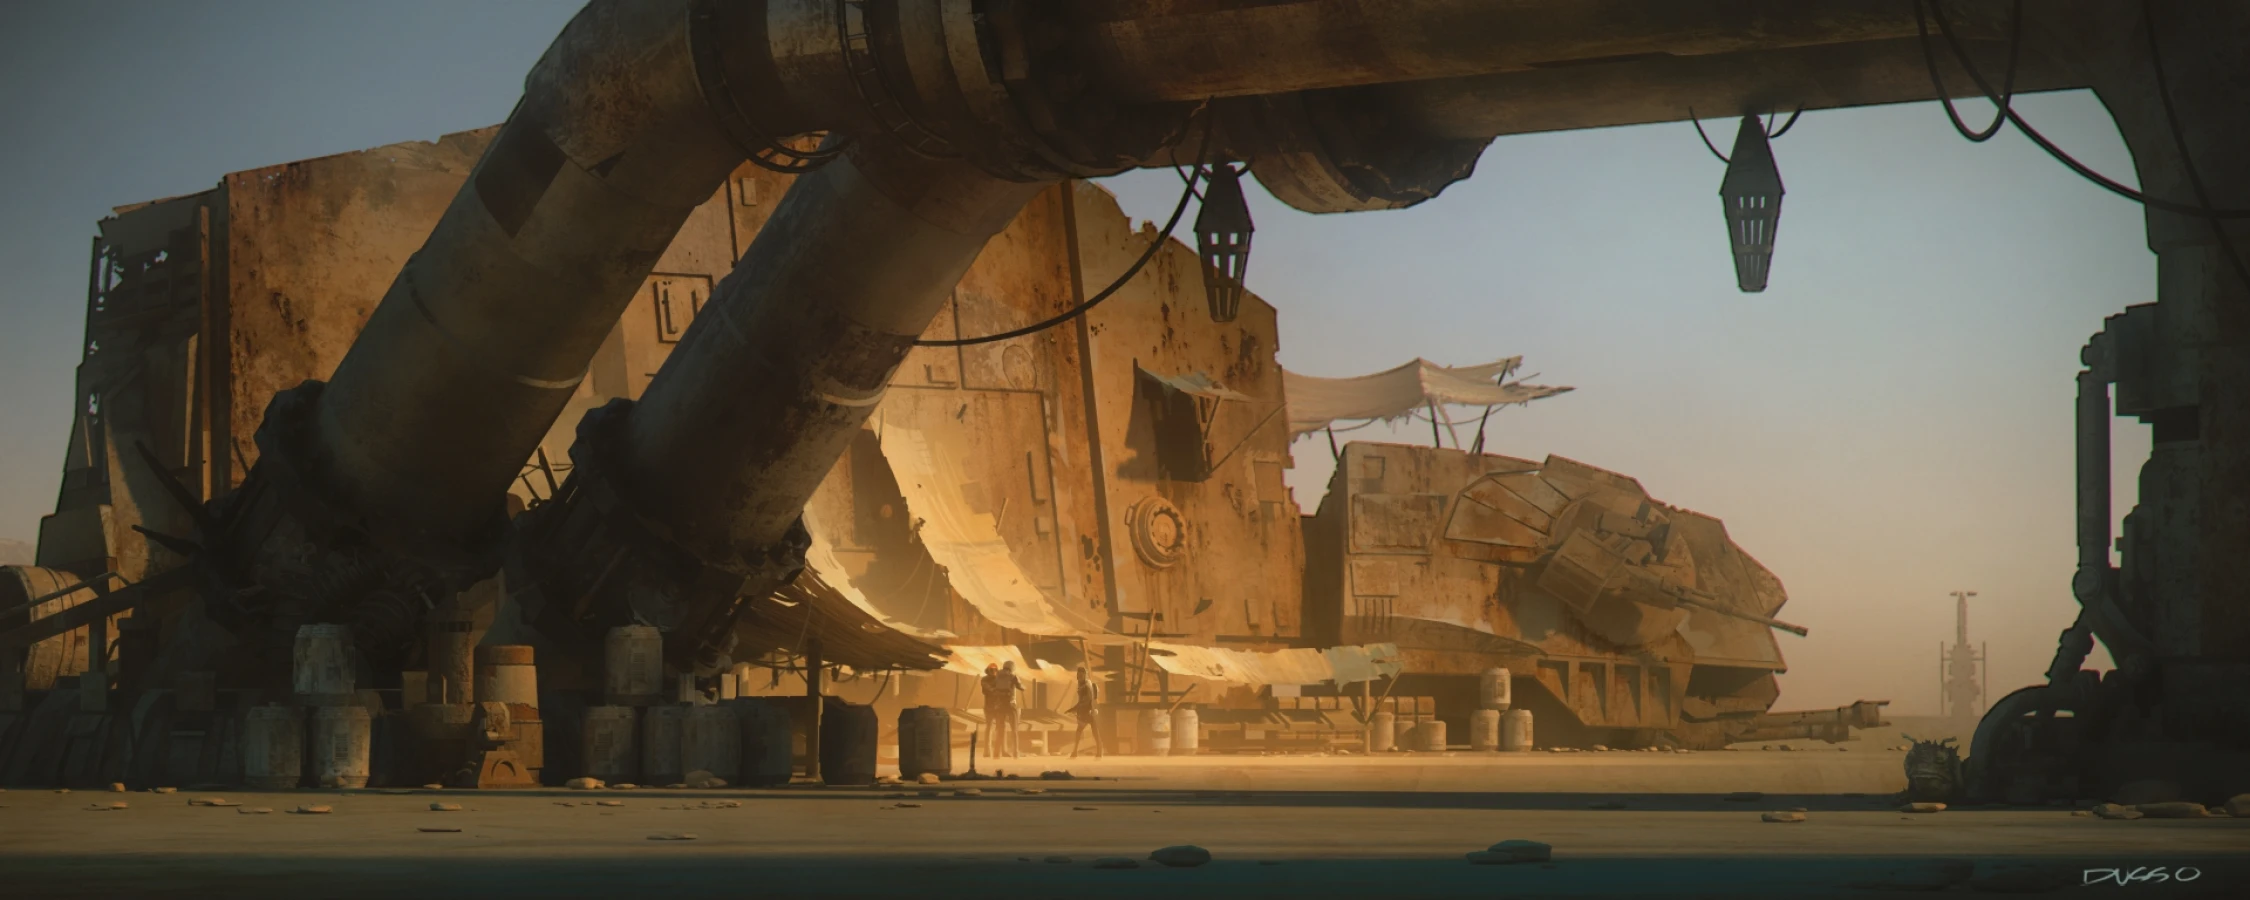  Star Wars pipes and house concept art by Dusso 